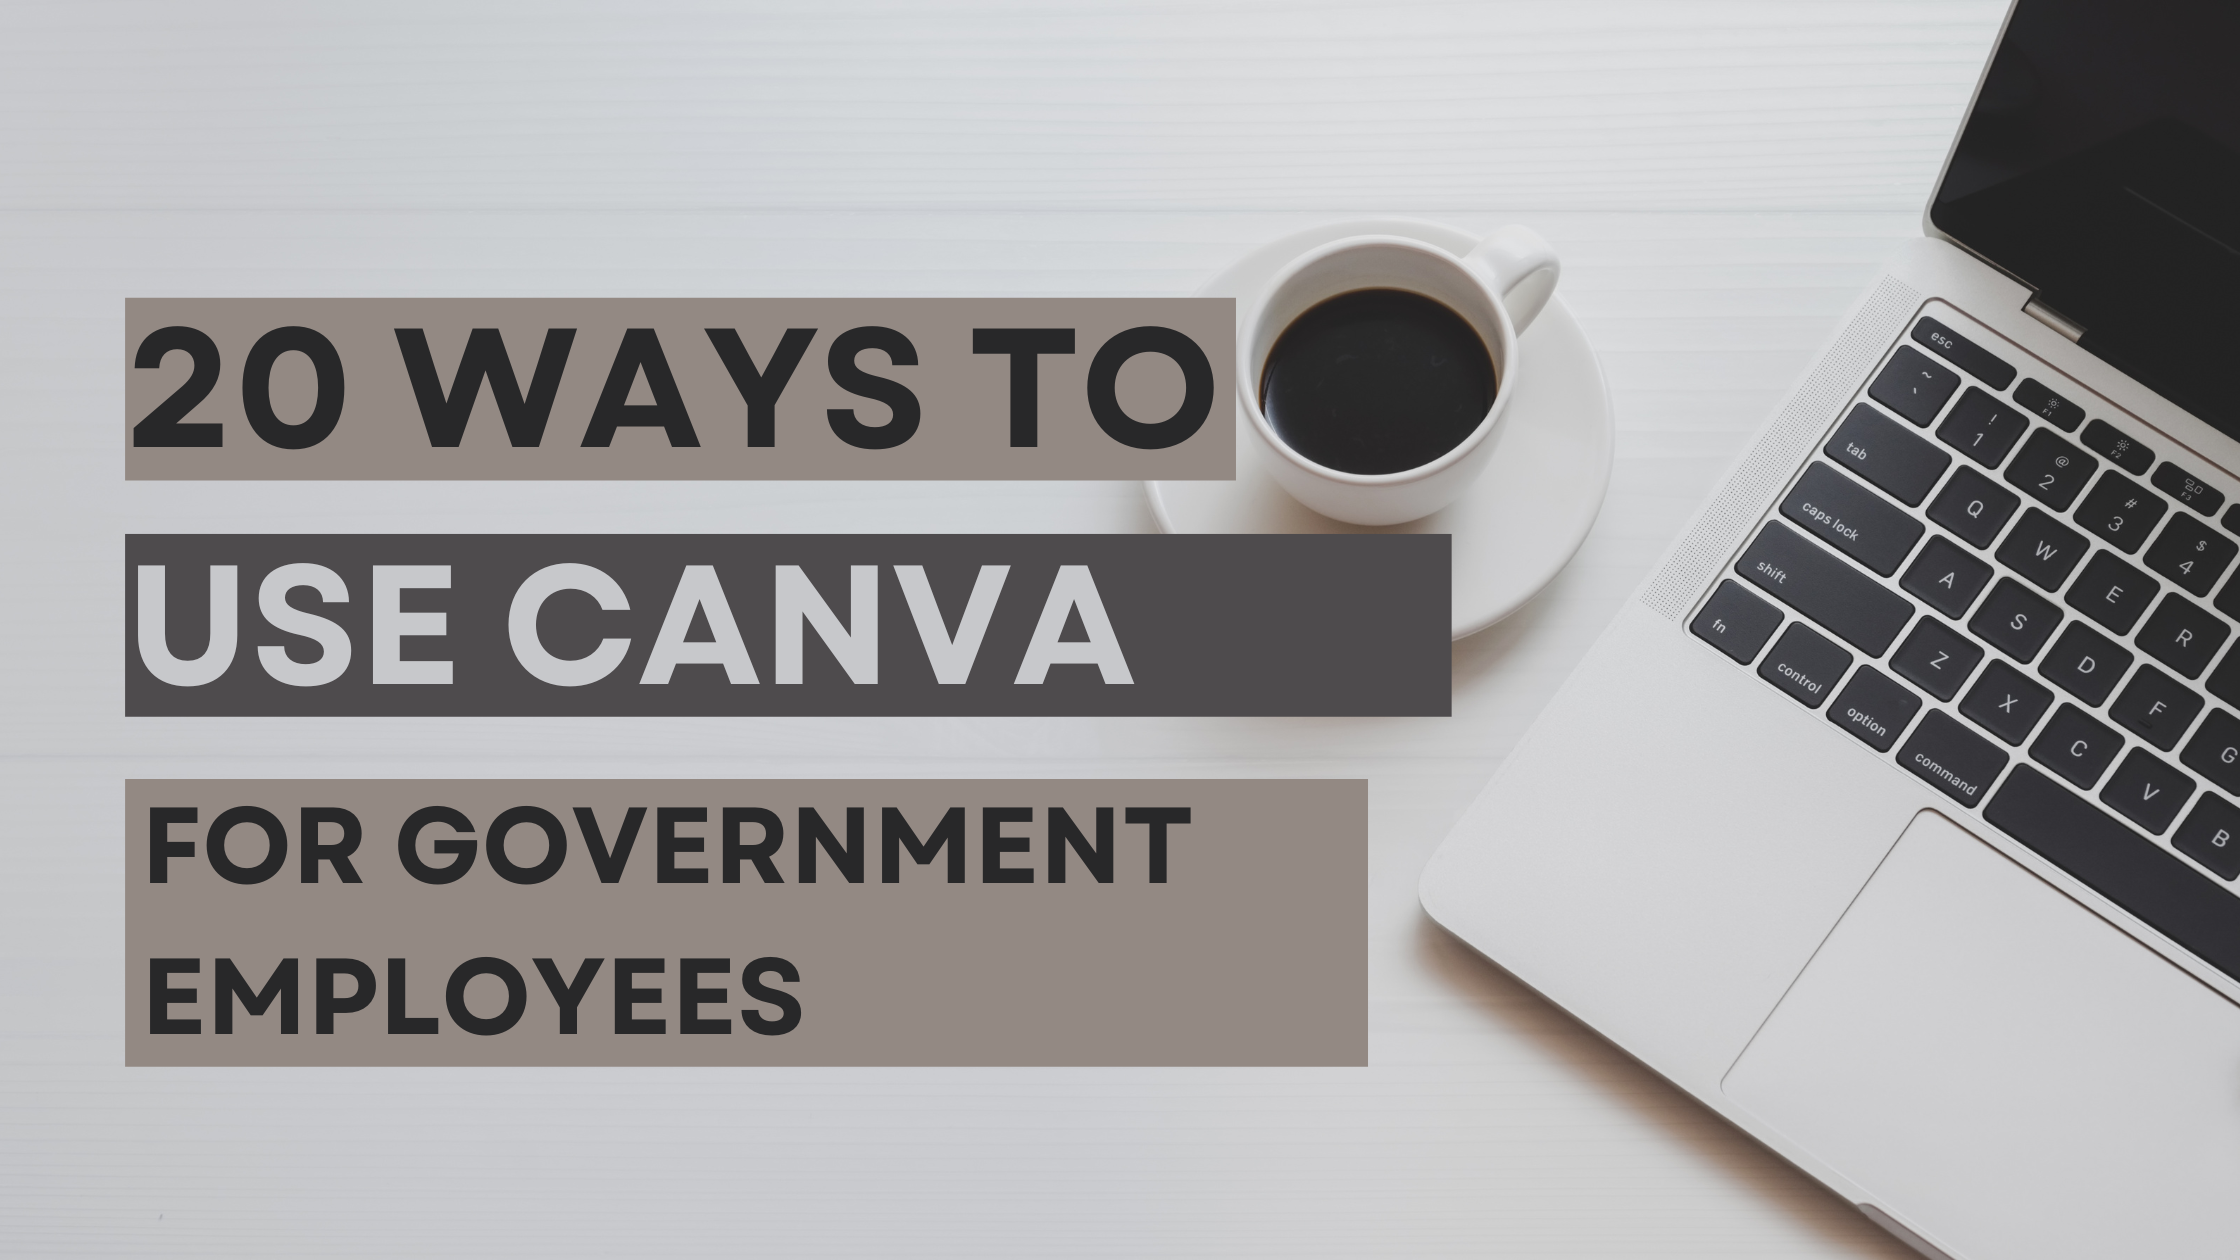 Canva for Government Employees: Free AI Tool to Revolutionize Communication